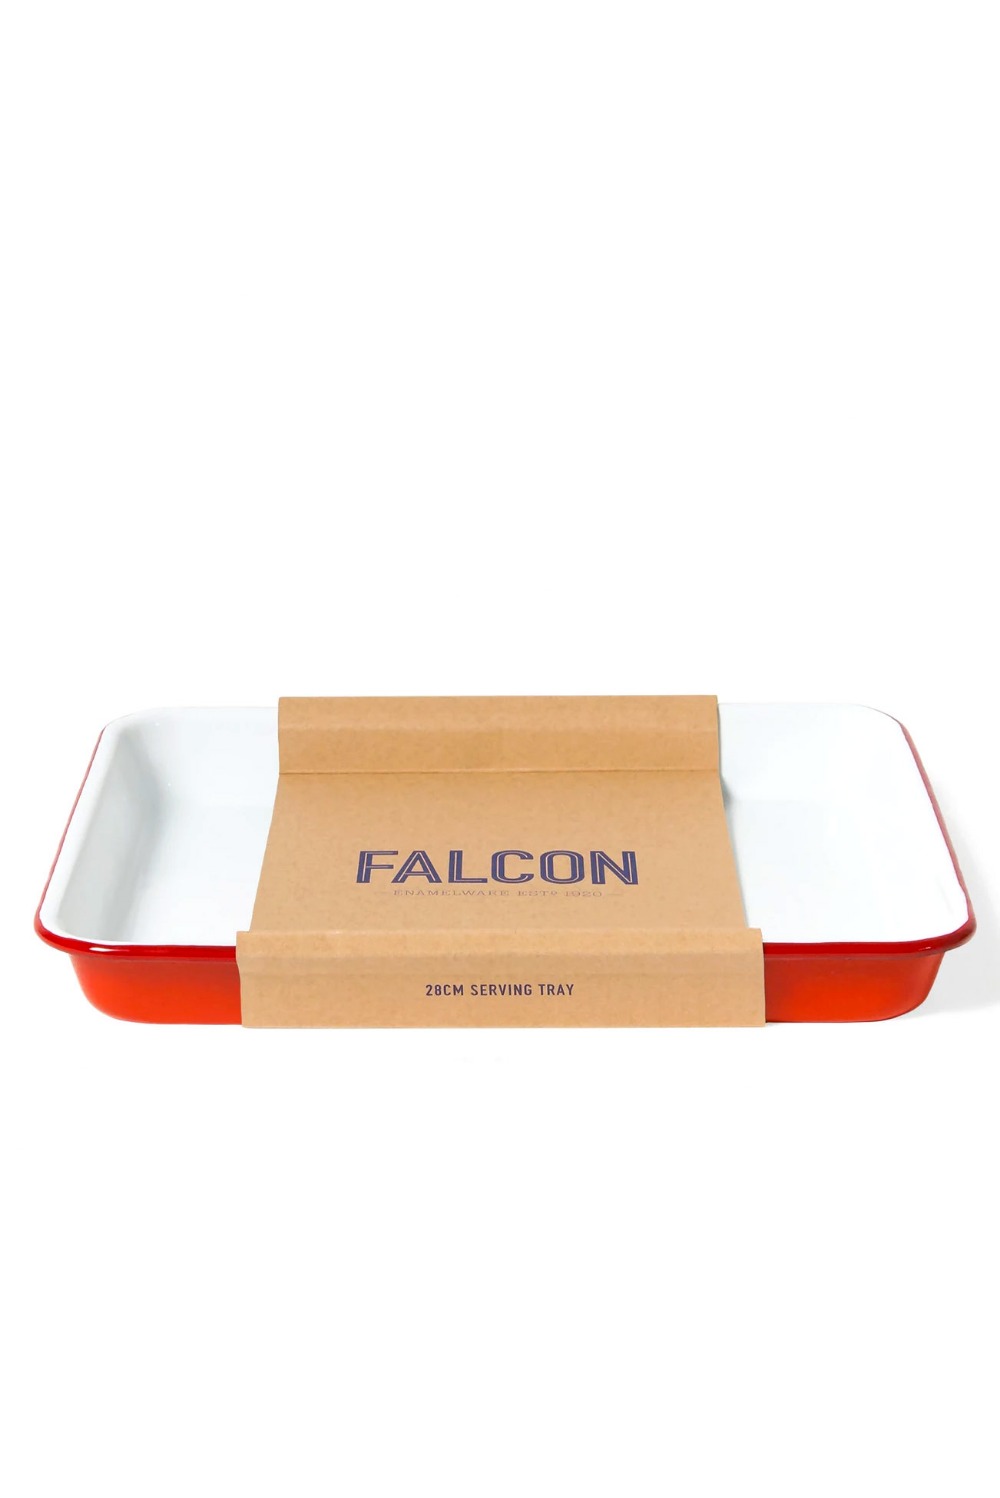 FALCON(팔콘) Serving Tray - red